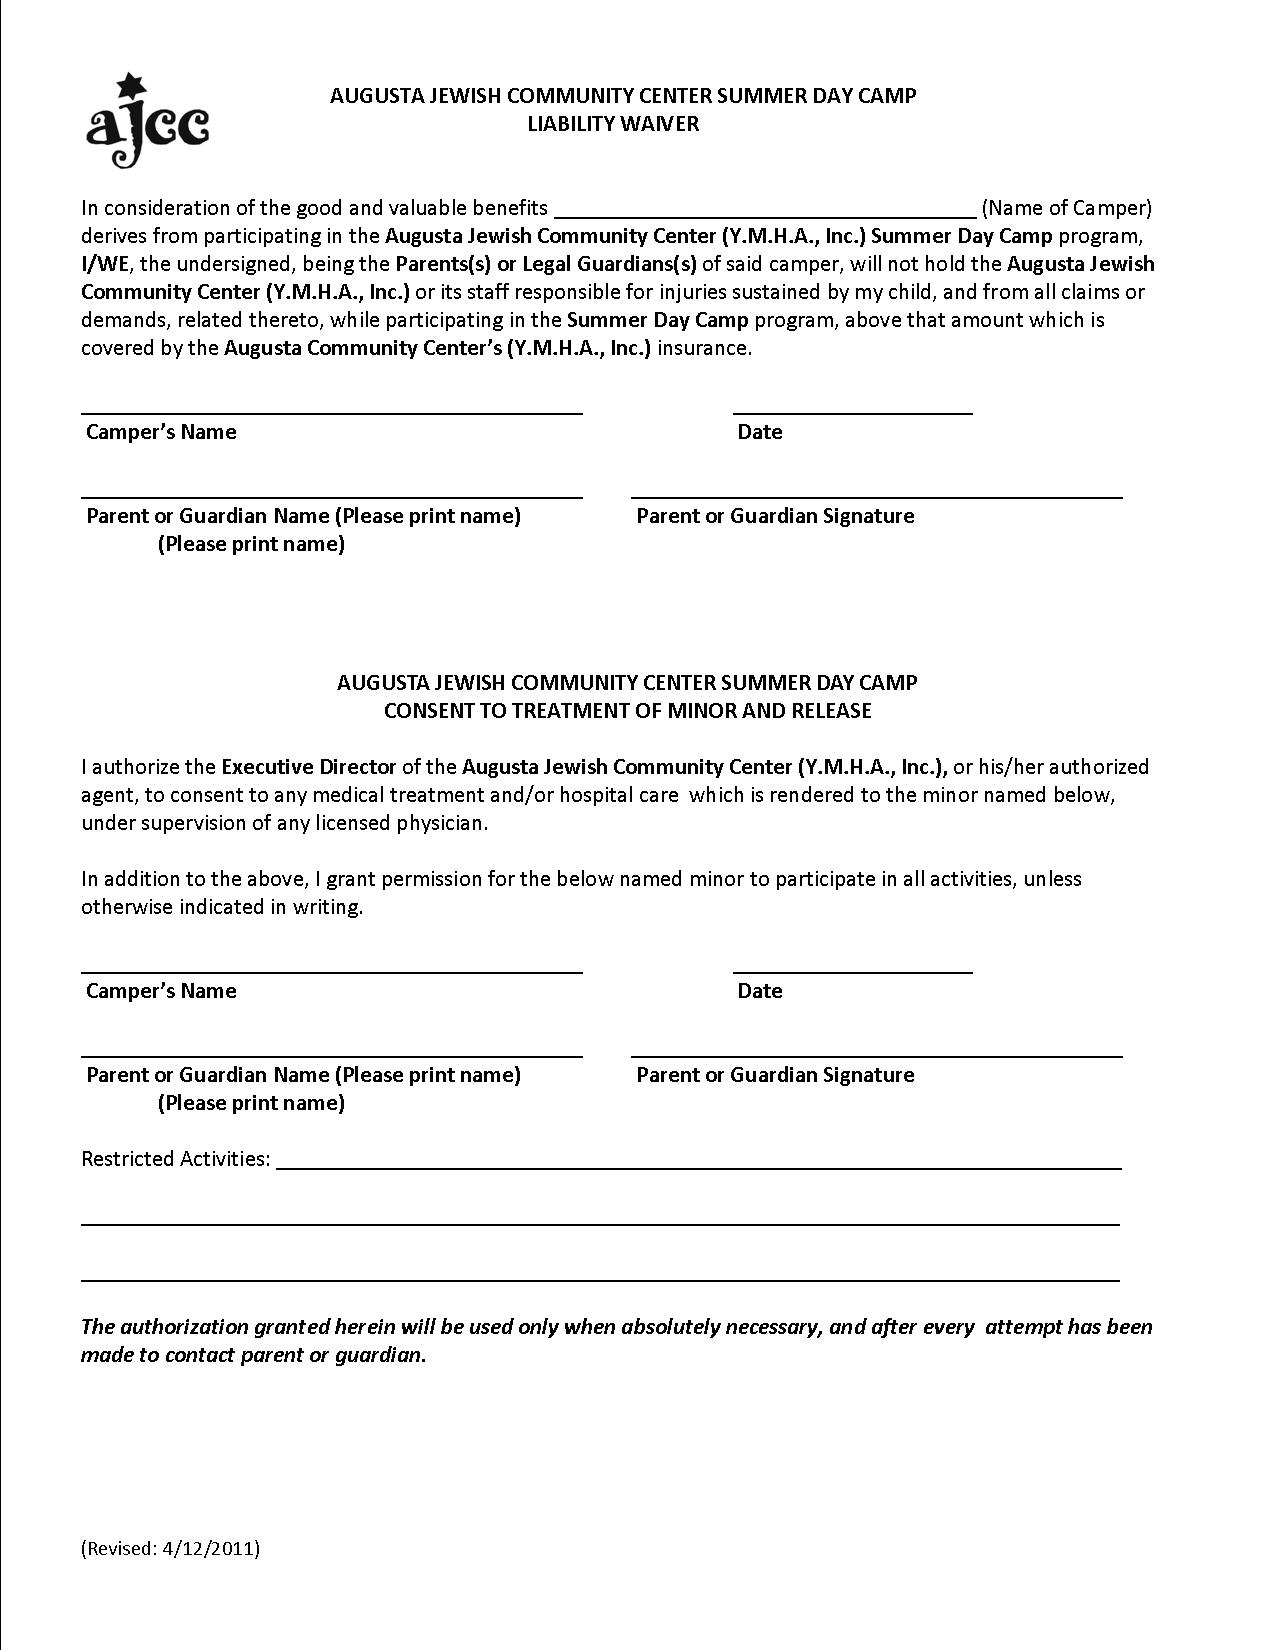 legal-liability-waiver-form-free-printable-documents